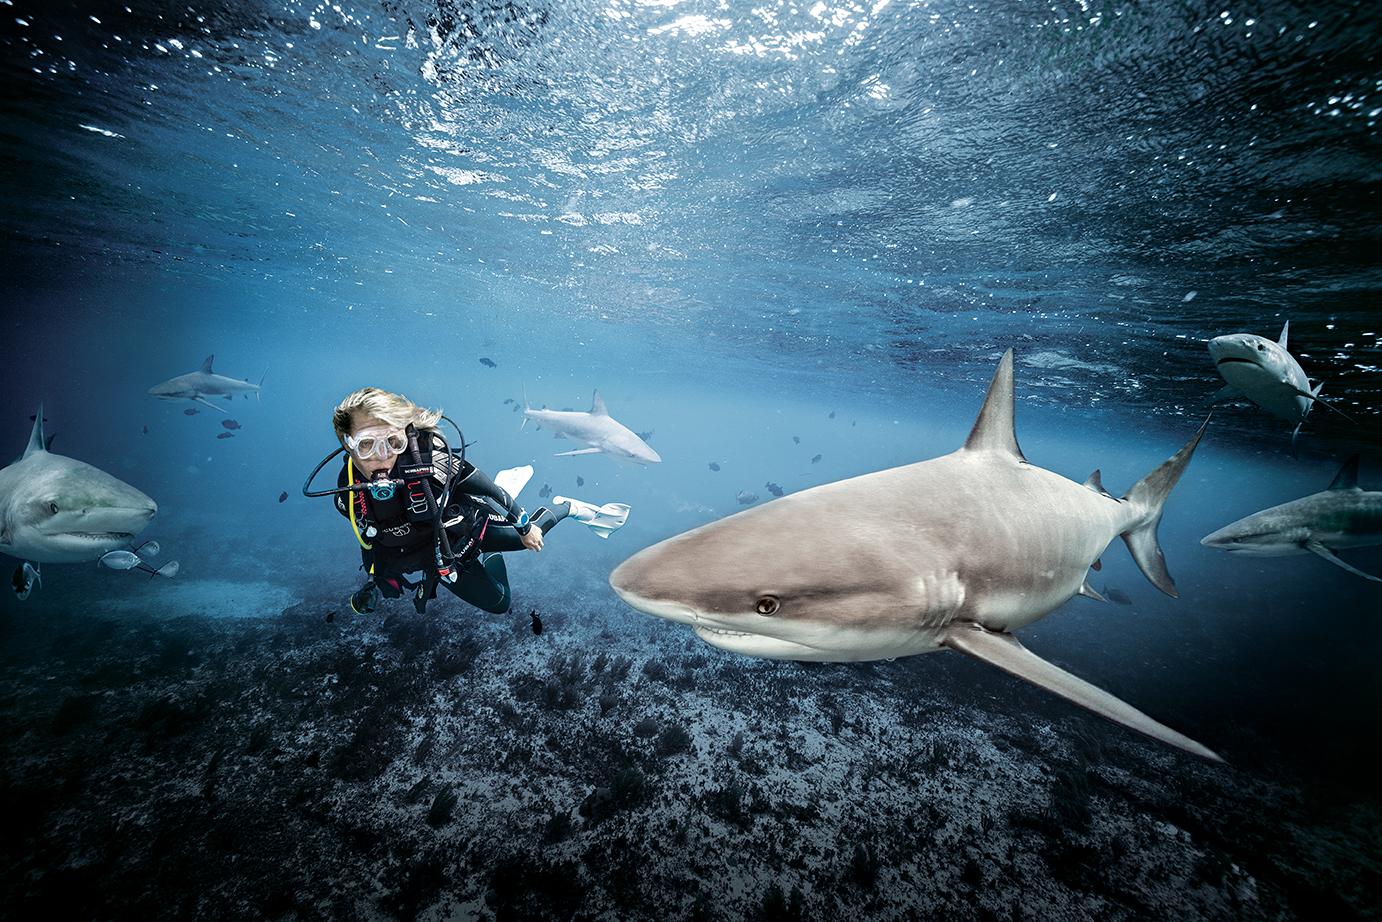 Is Diving With Sharks Safe? - Shark Angels